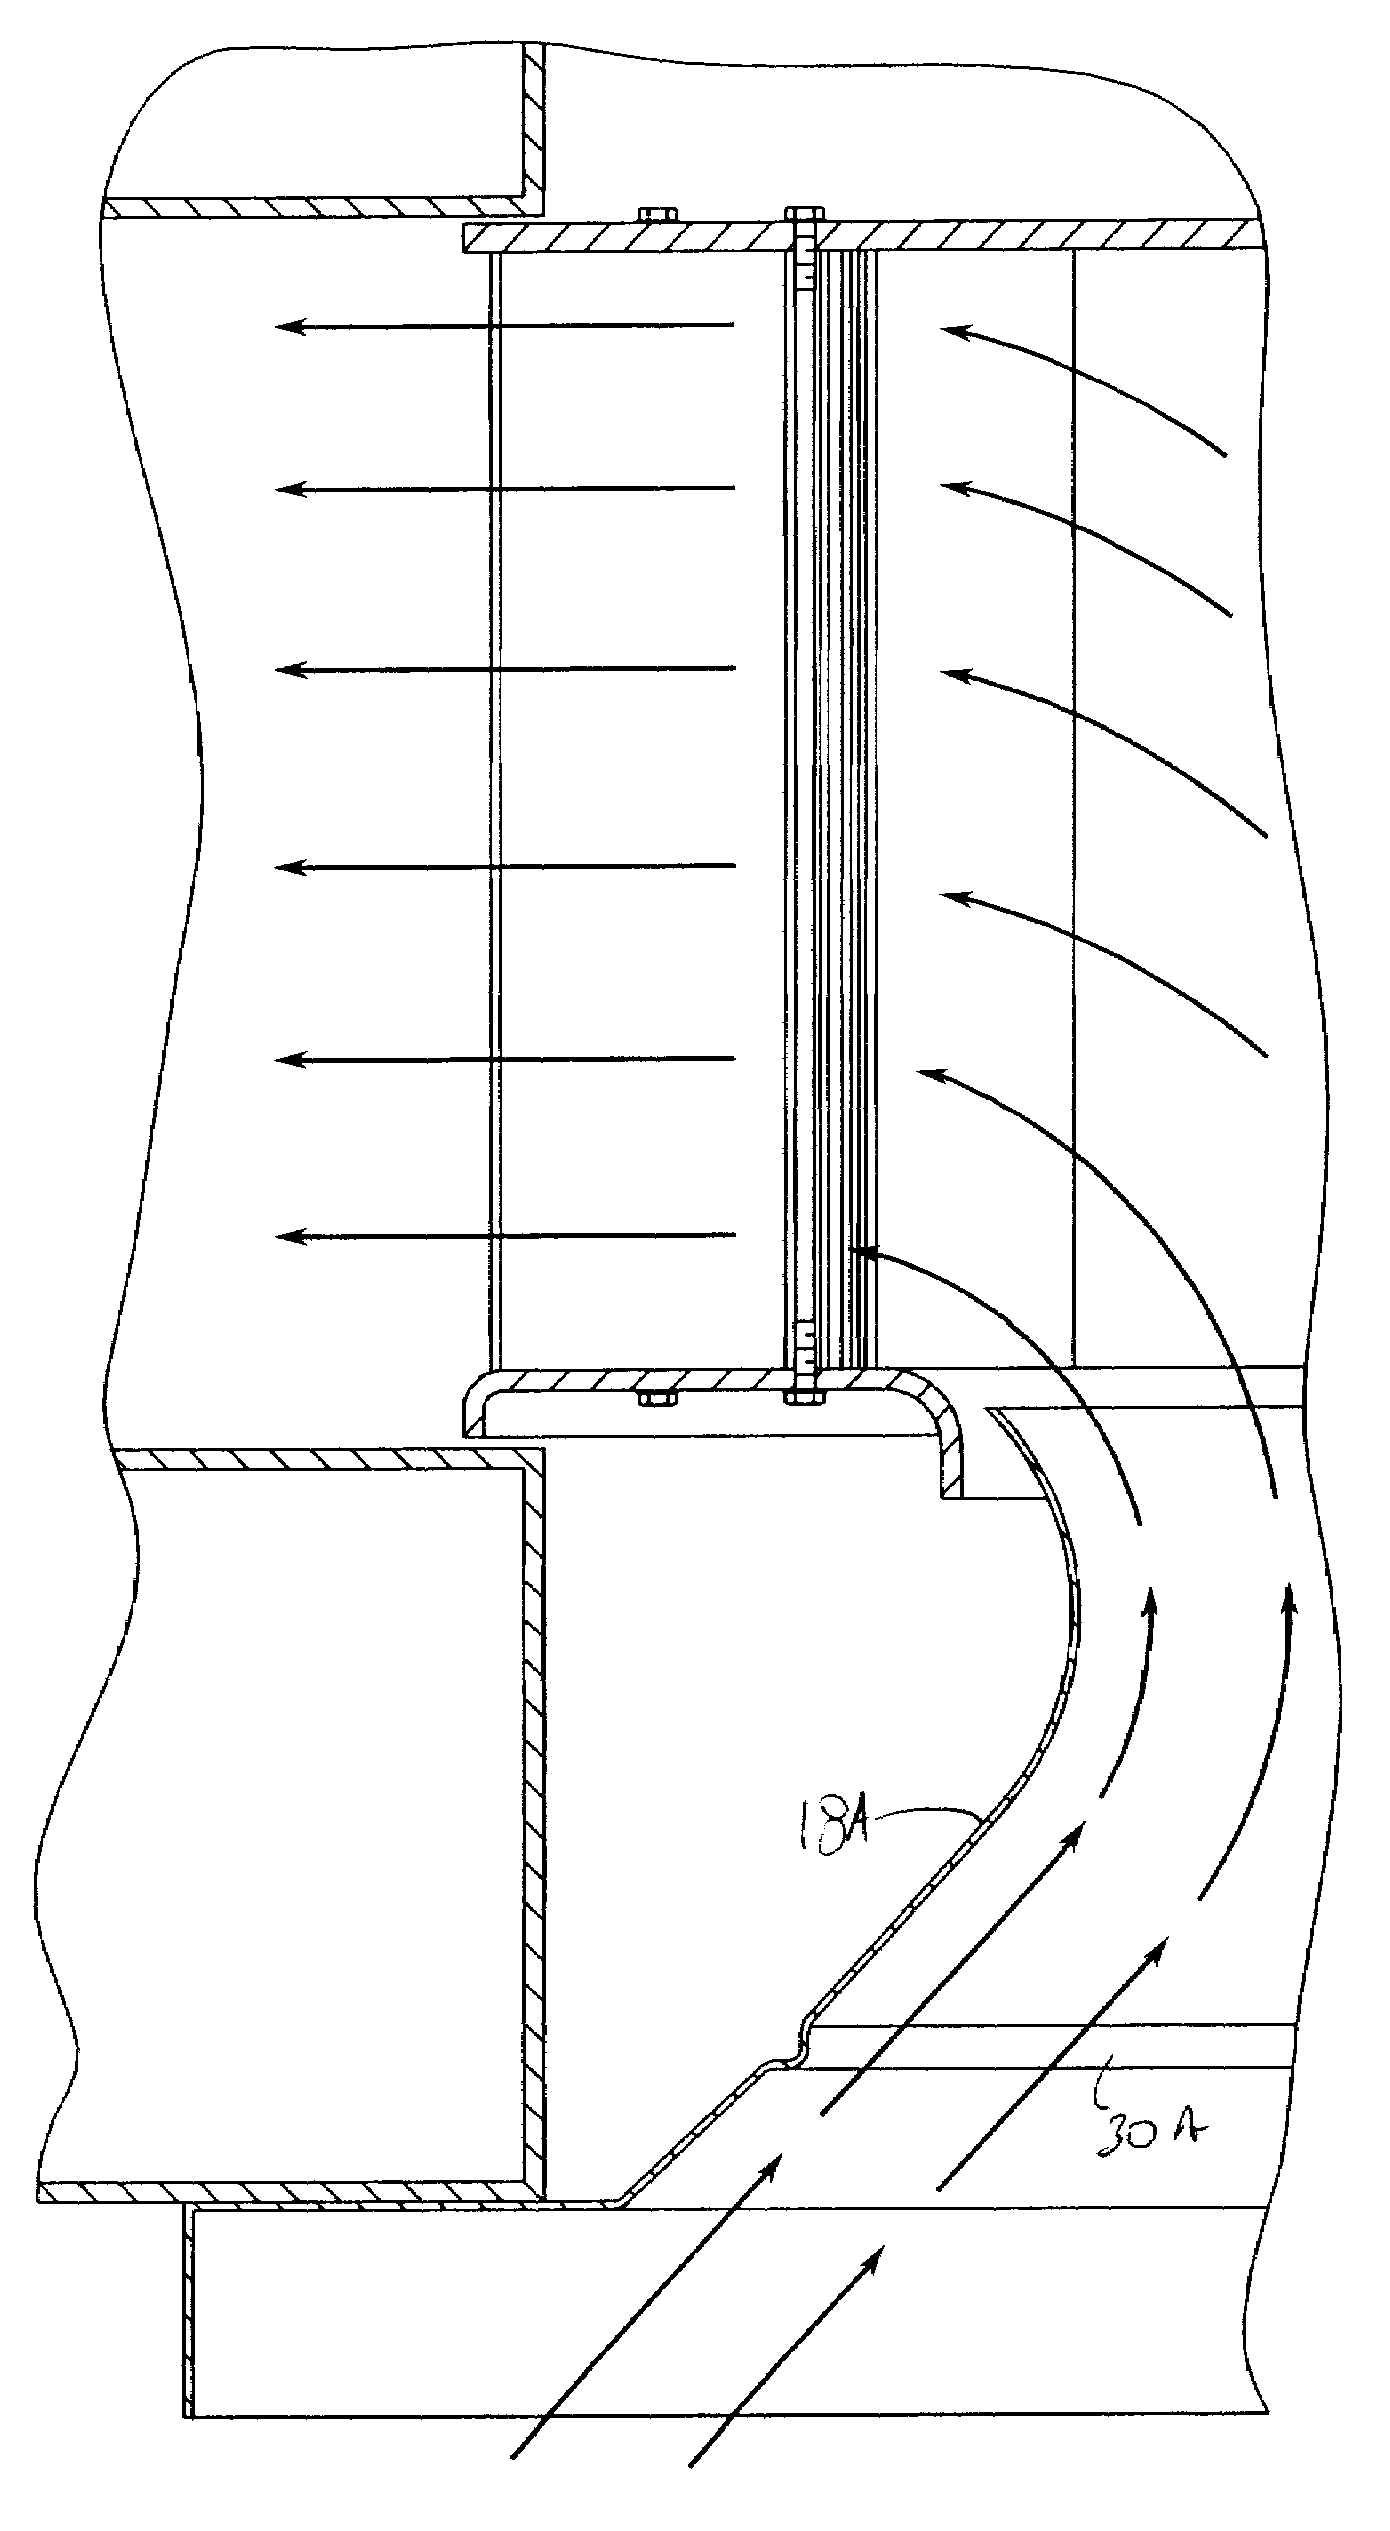 Centrifugal fan with turbulence inducing inlet bell